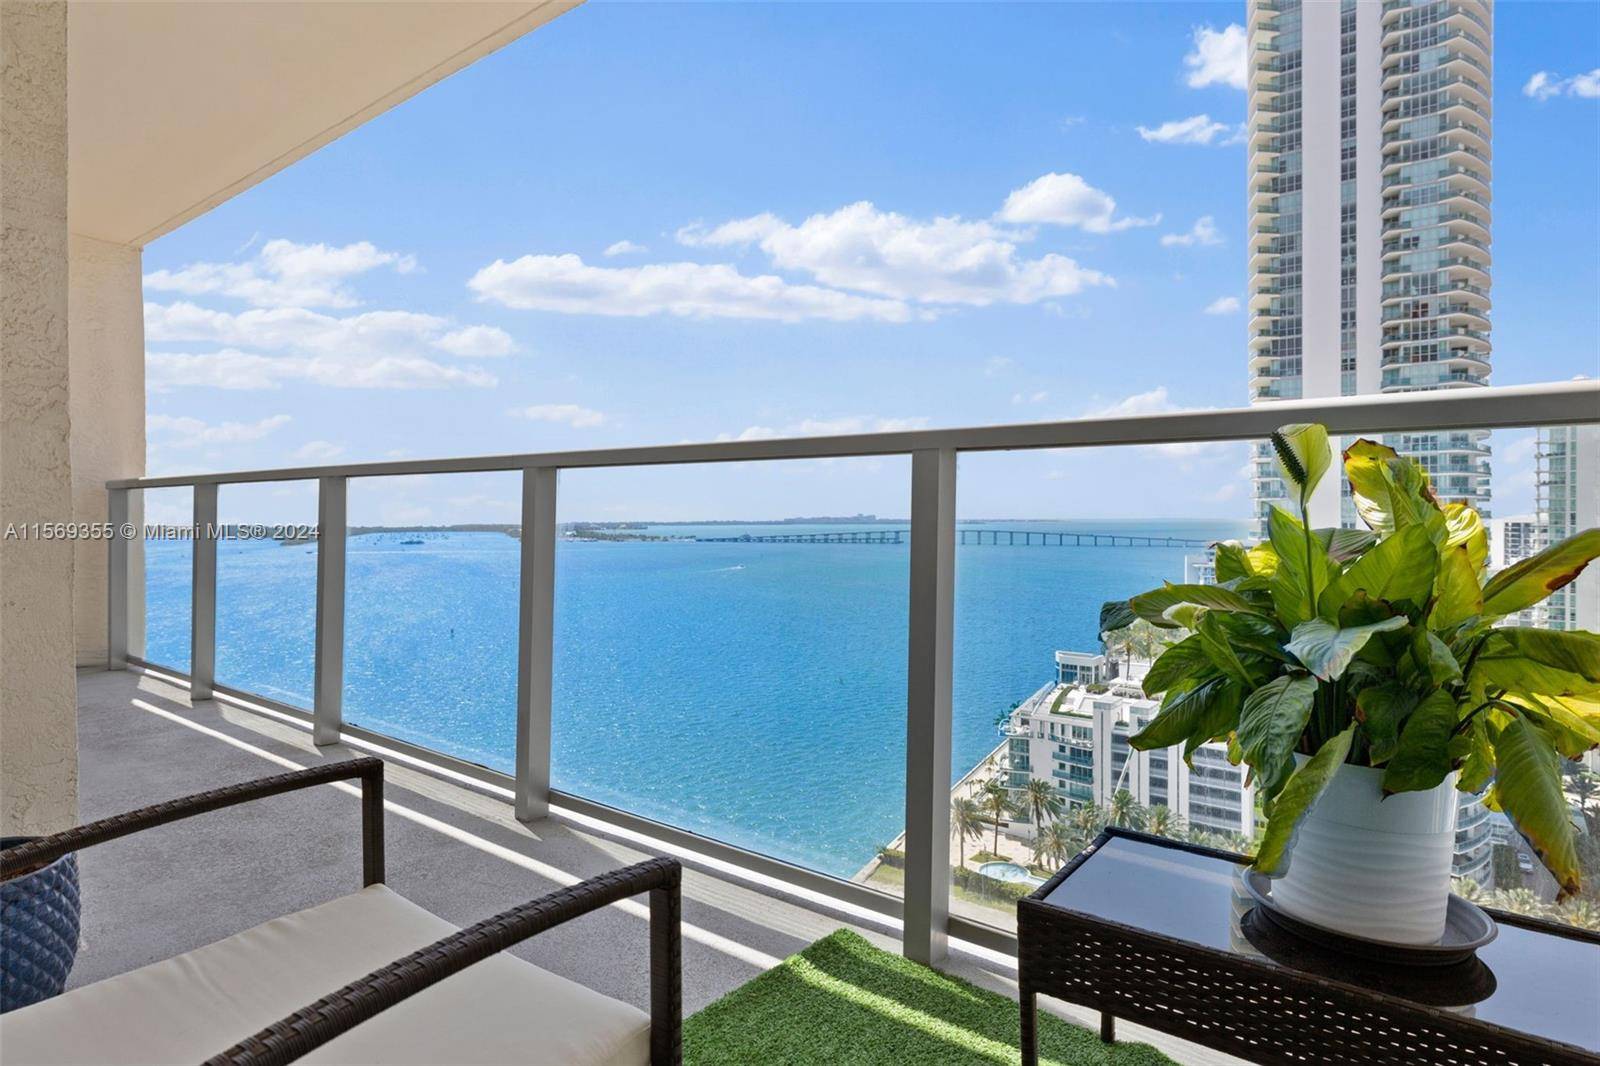 Stunning Water Views of Biscayne Bay, Family Oriented Building, Newly Remodeled, Natural Sunlight, White Porcelain Tiles, Quartz Countertop Bar, Washer Dryer.